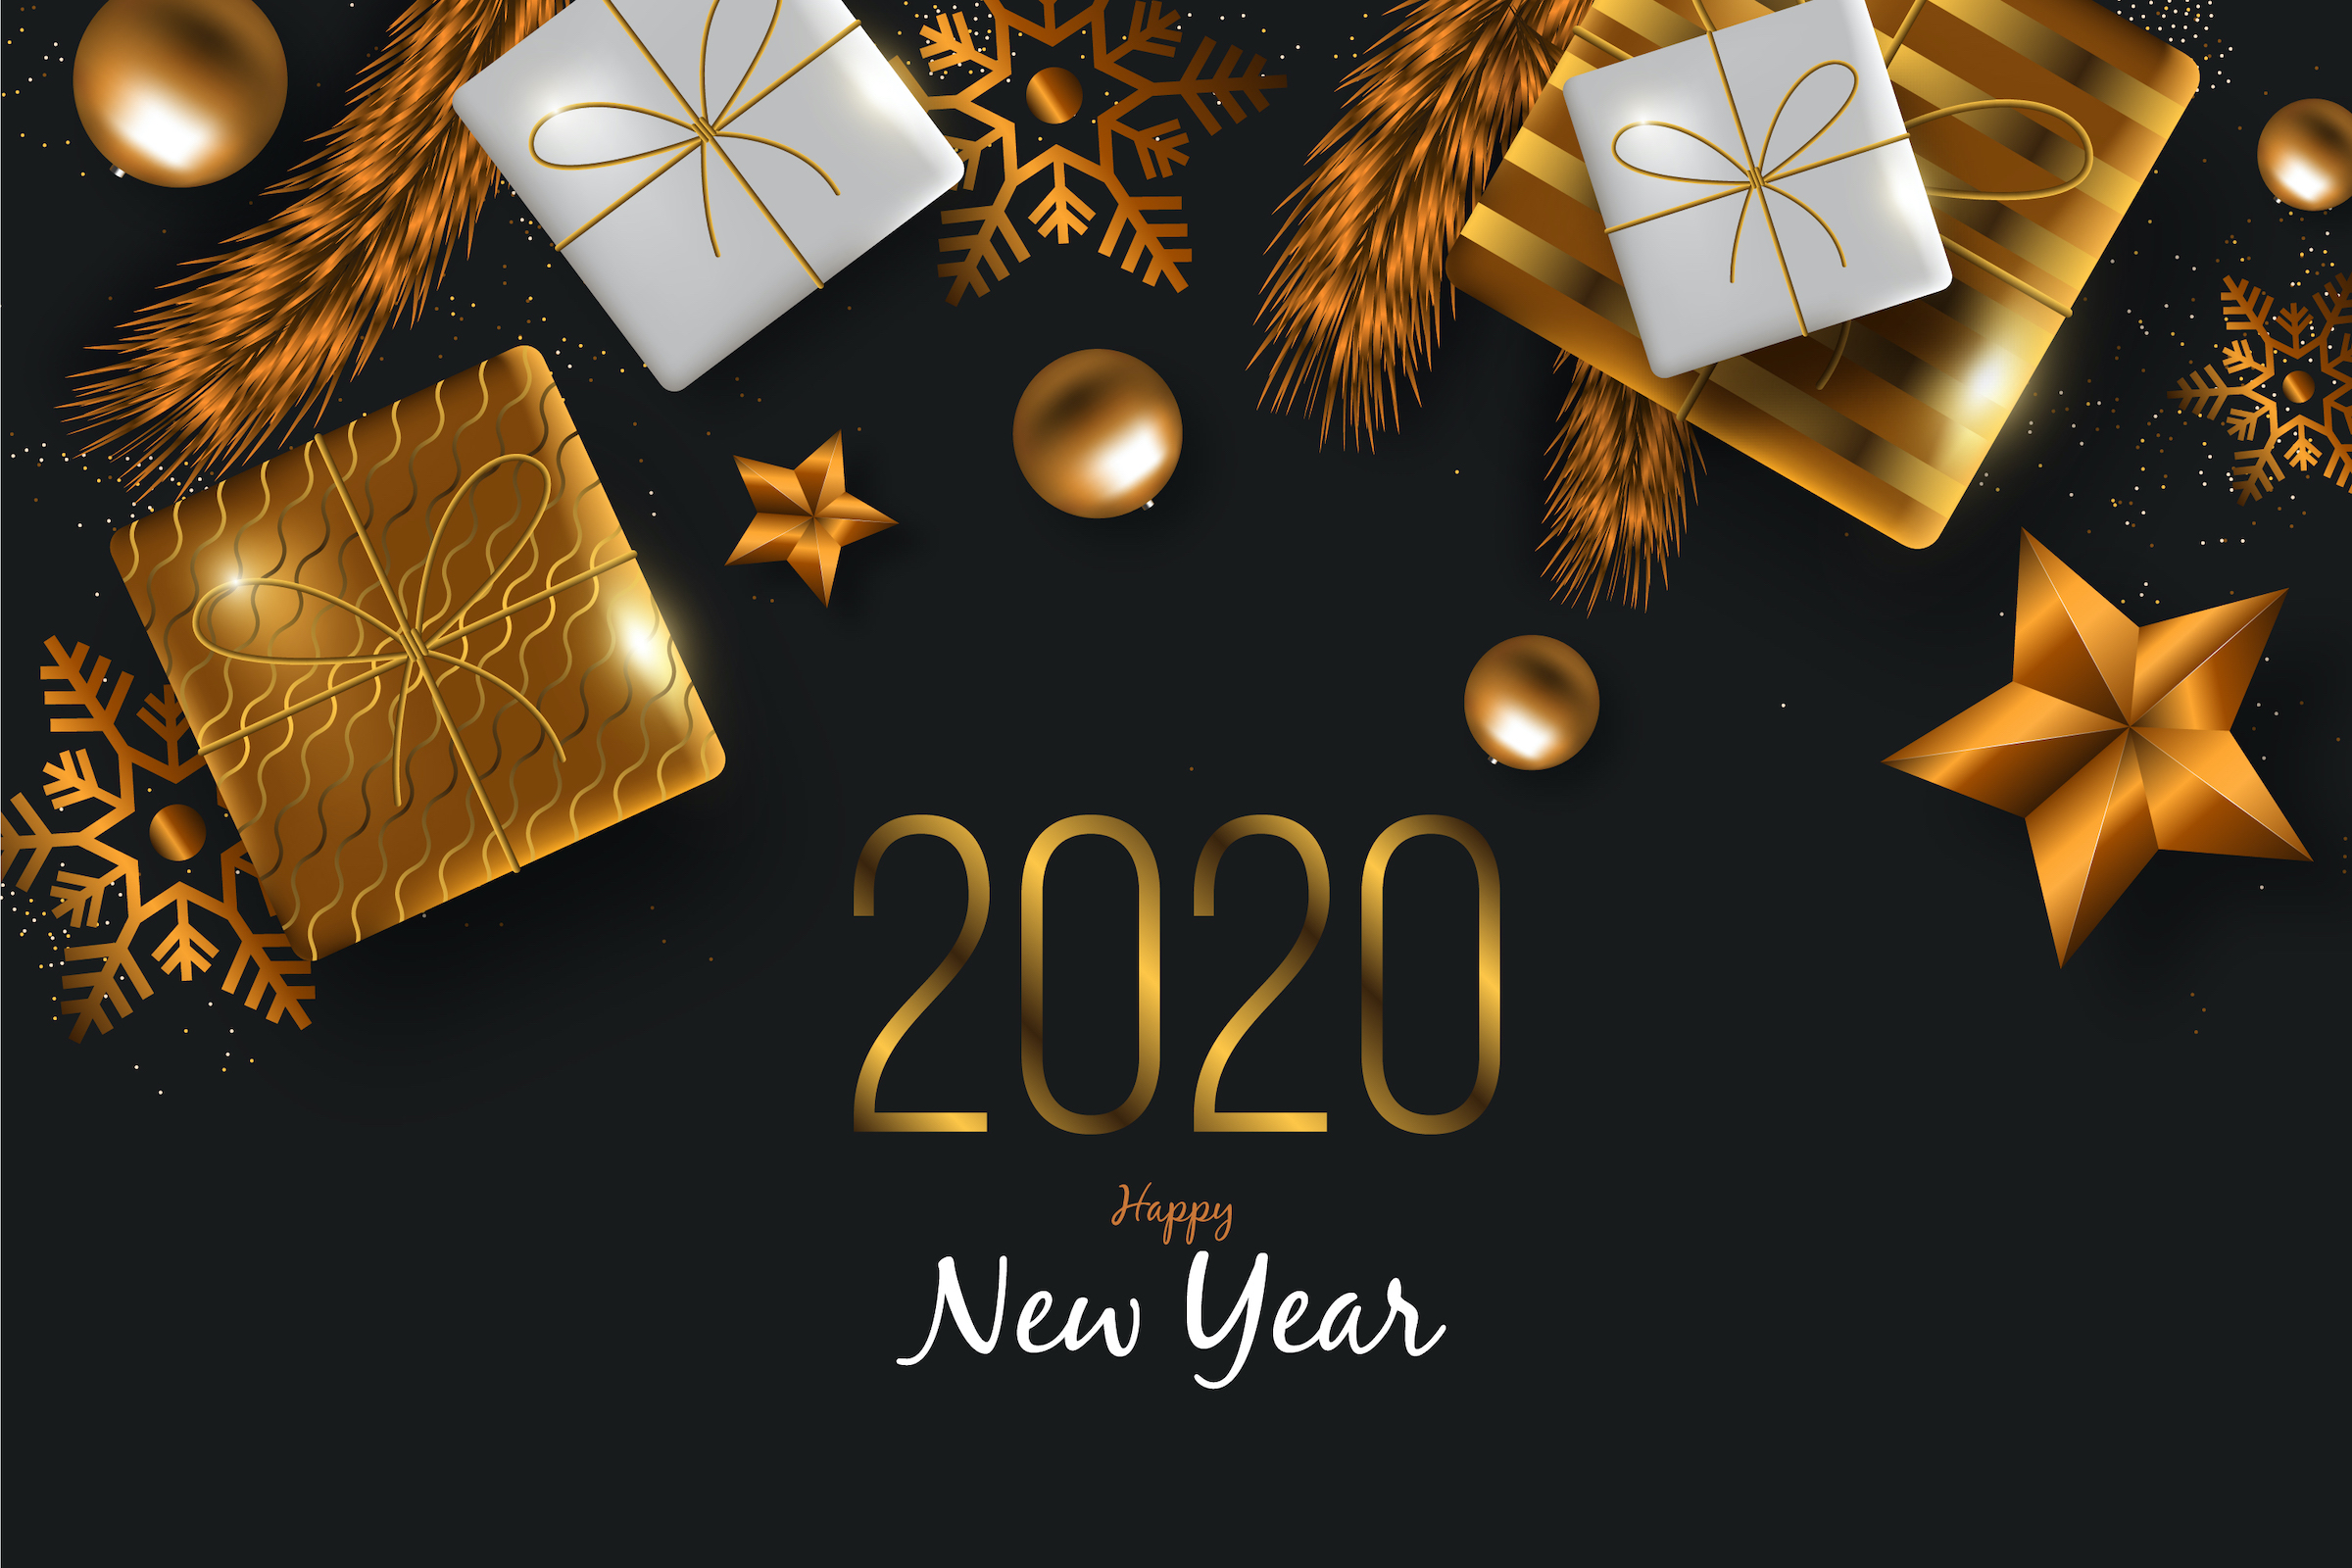 New Year 2020 Background with Realistic Golden Decoration